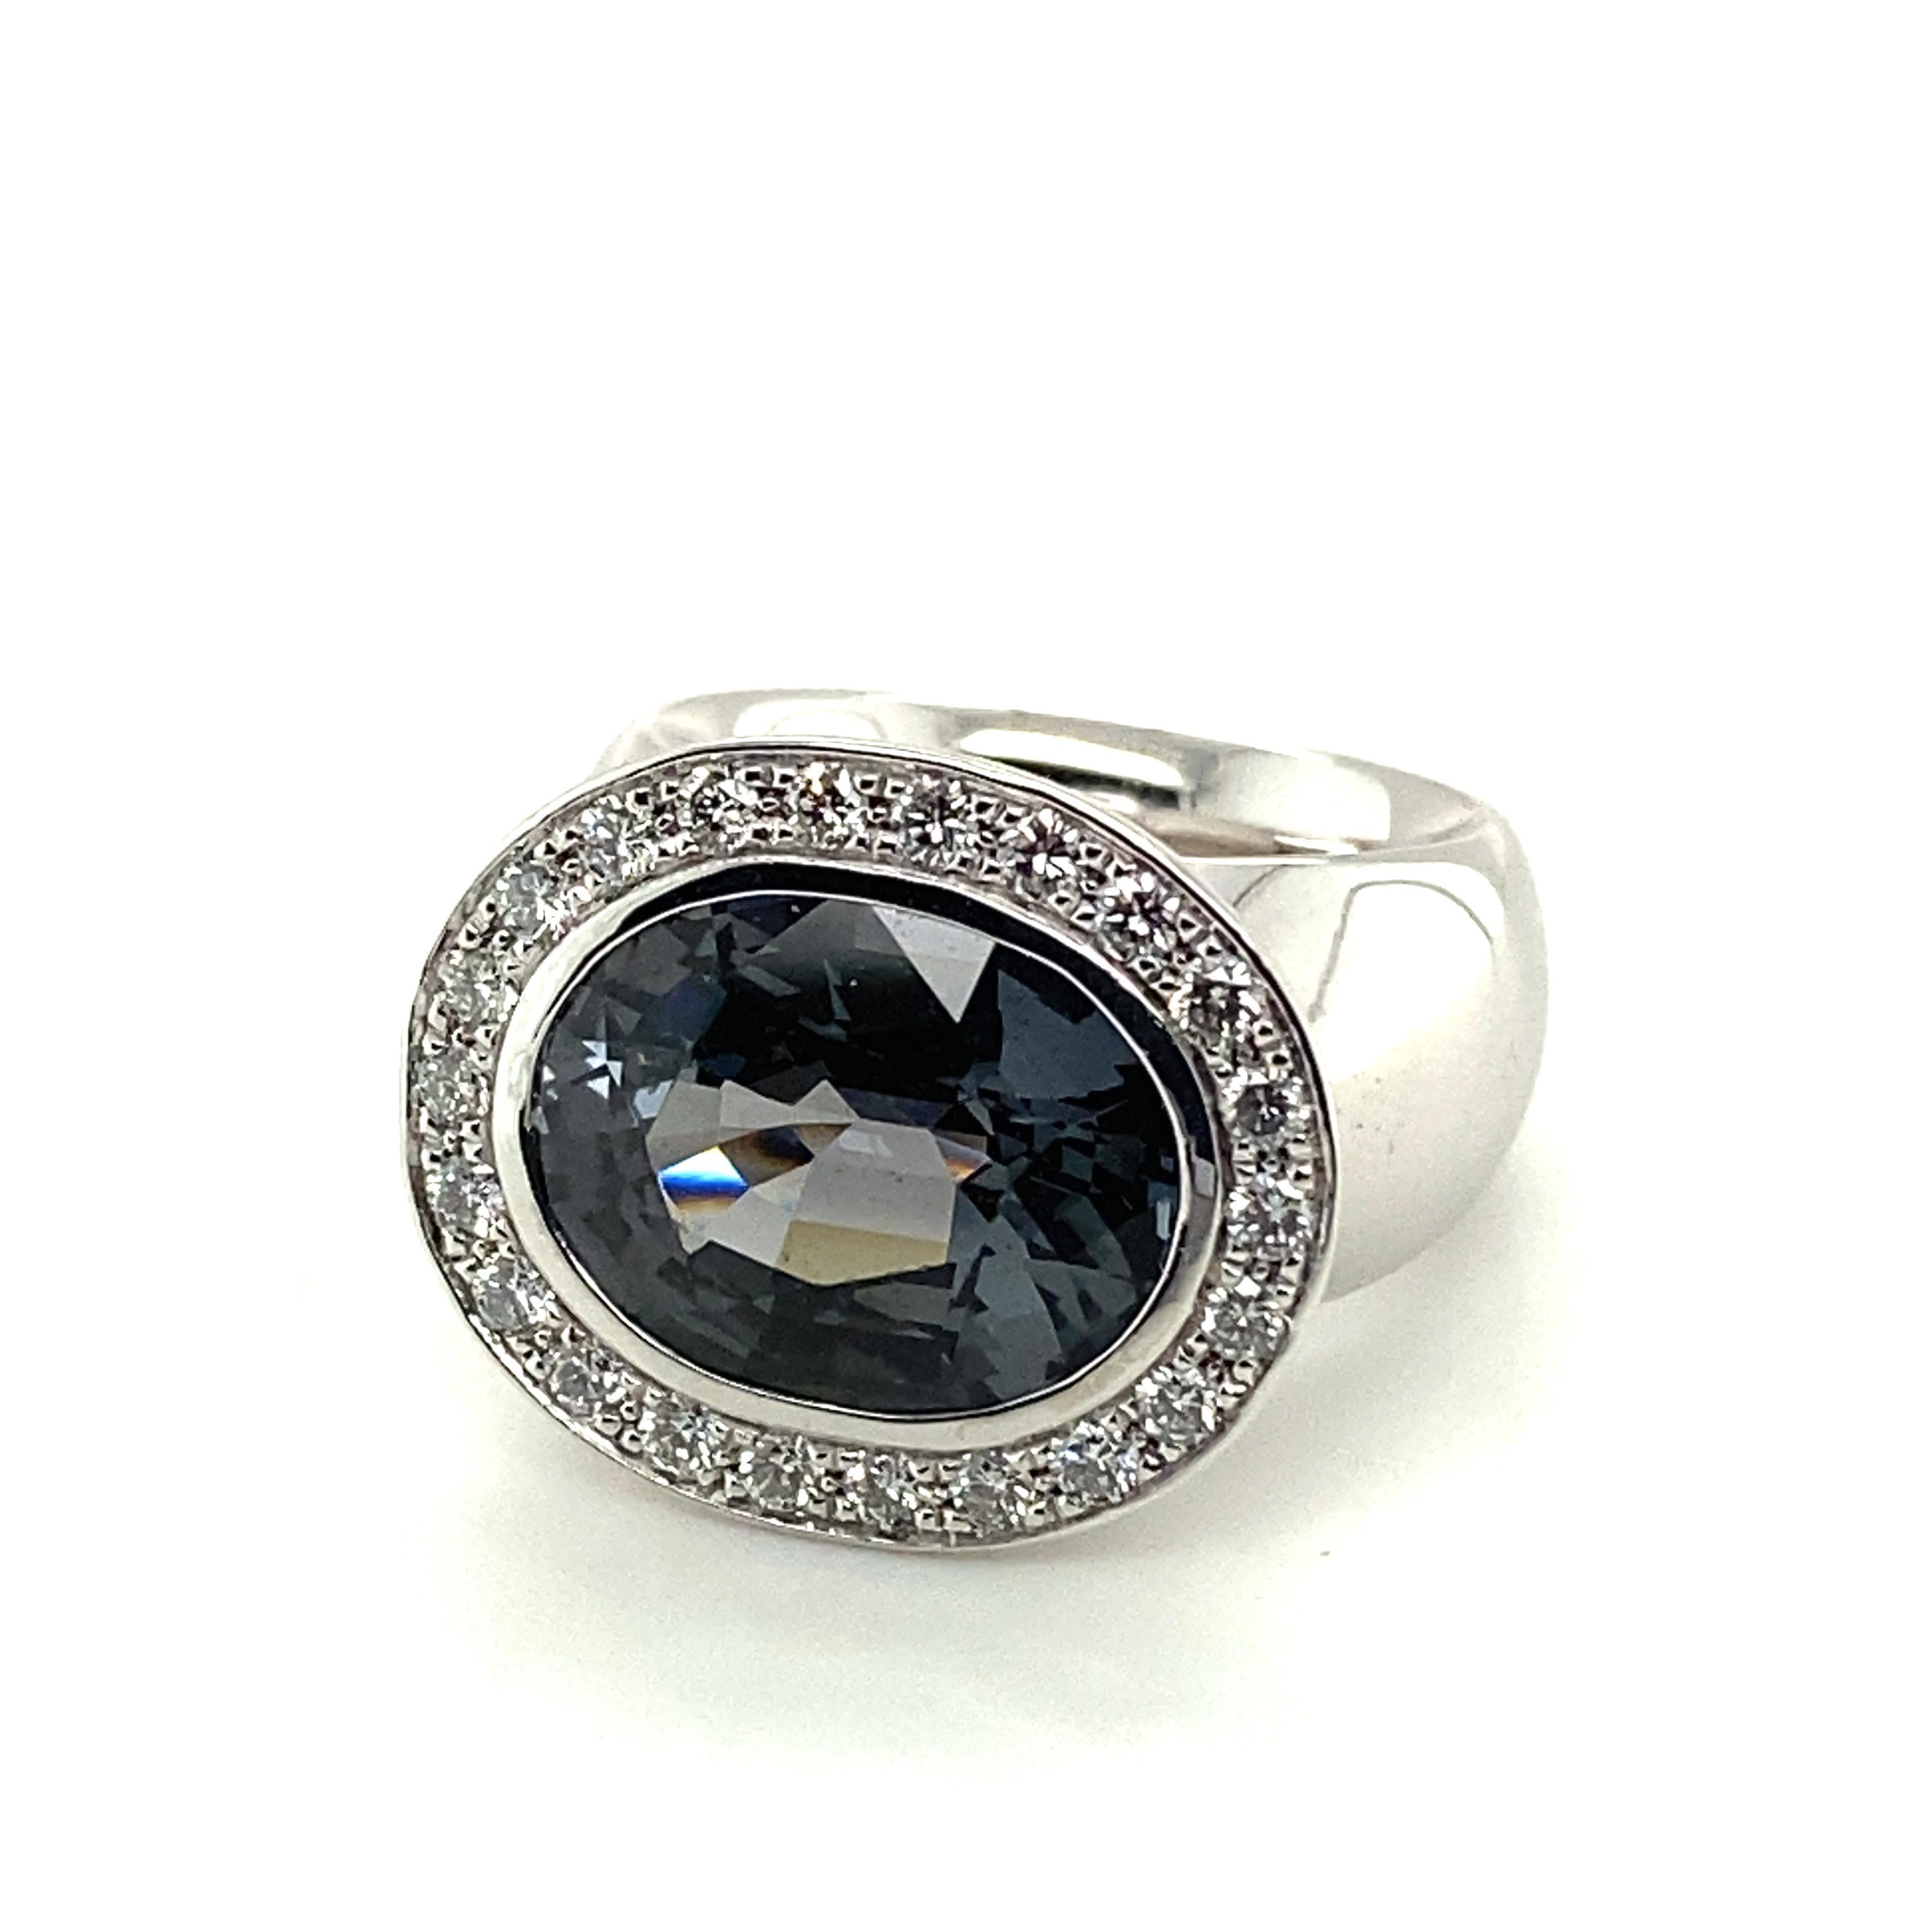 Mesmerising 8.84 Carat Grey Spinel and Diamond Ring in 18 Karat White Gold In Good Condition For Sale In Lucerne, CH